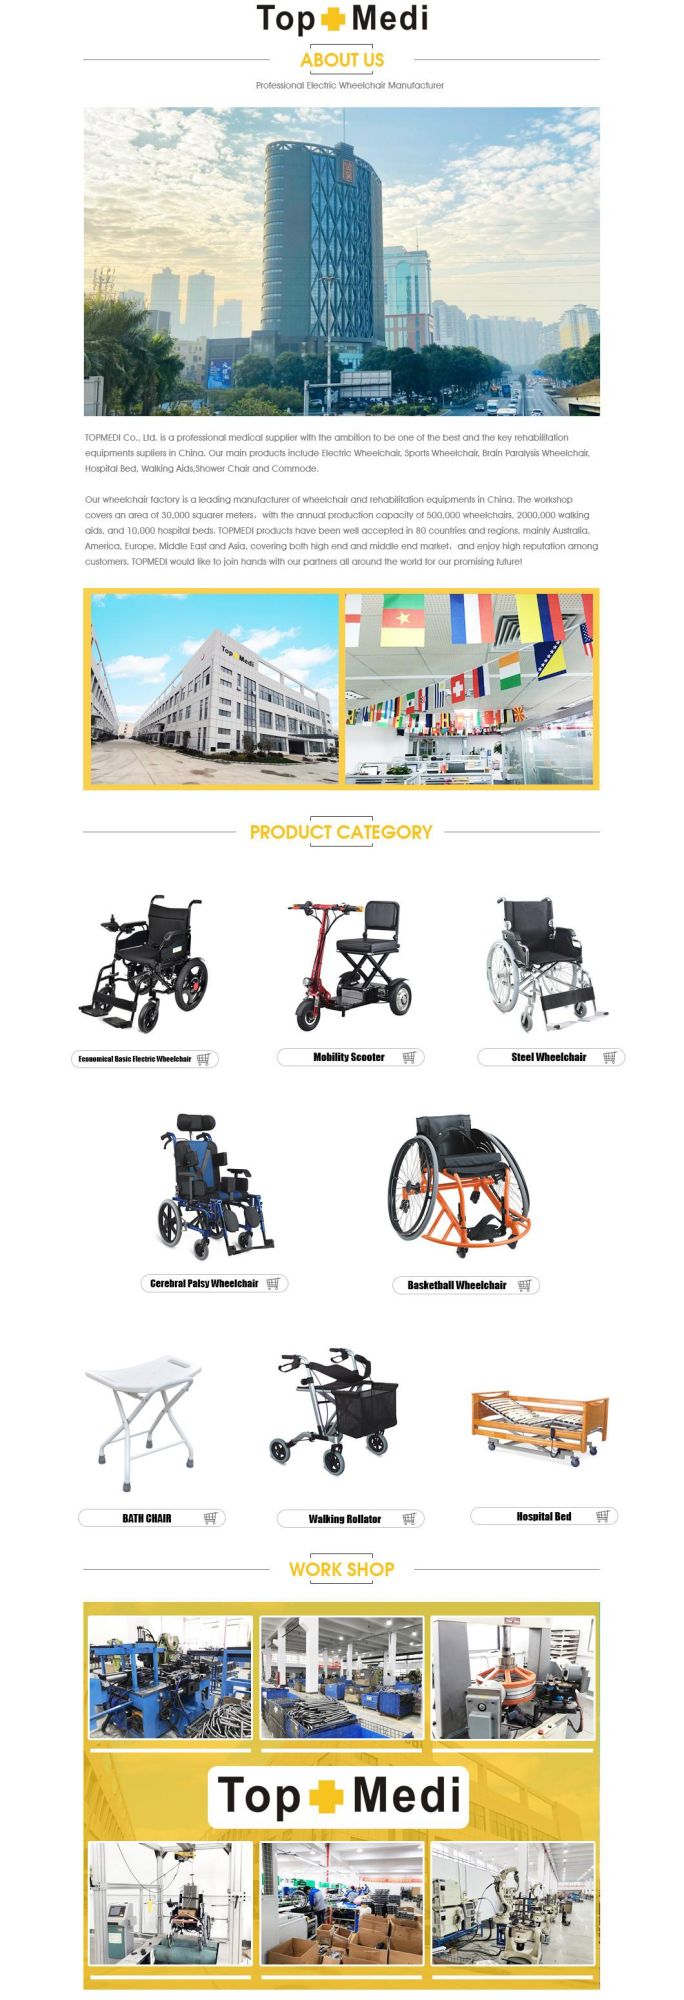 Hot Sales Top Quality Powder Aluminum Electric Wheel Chair